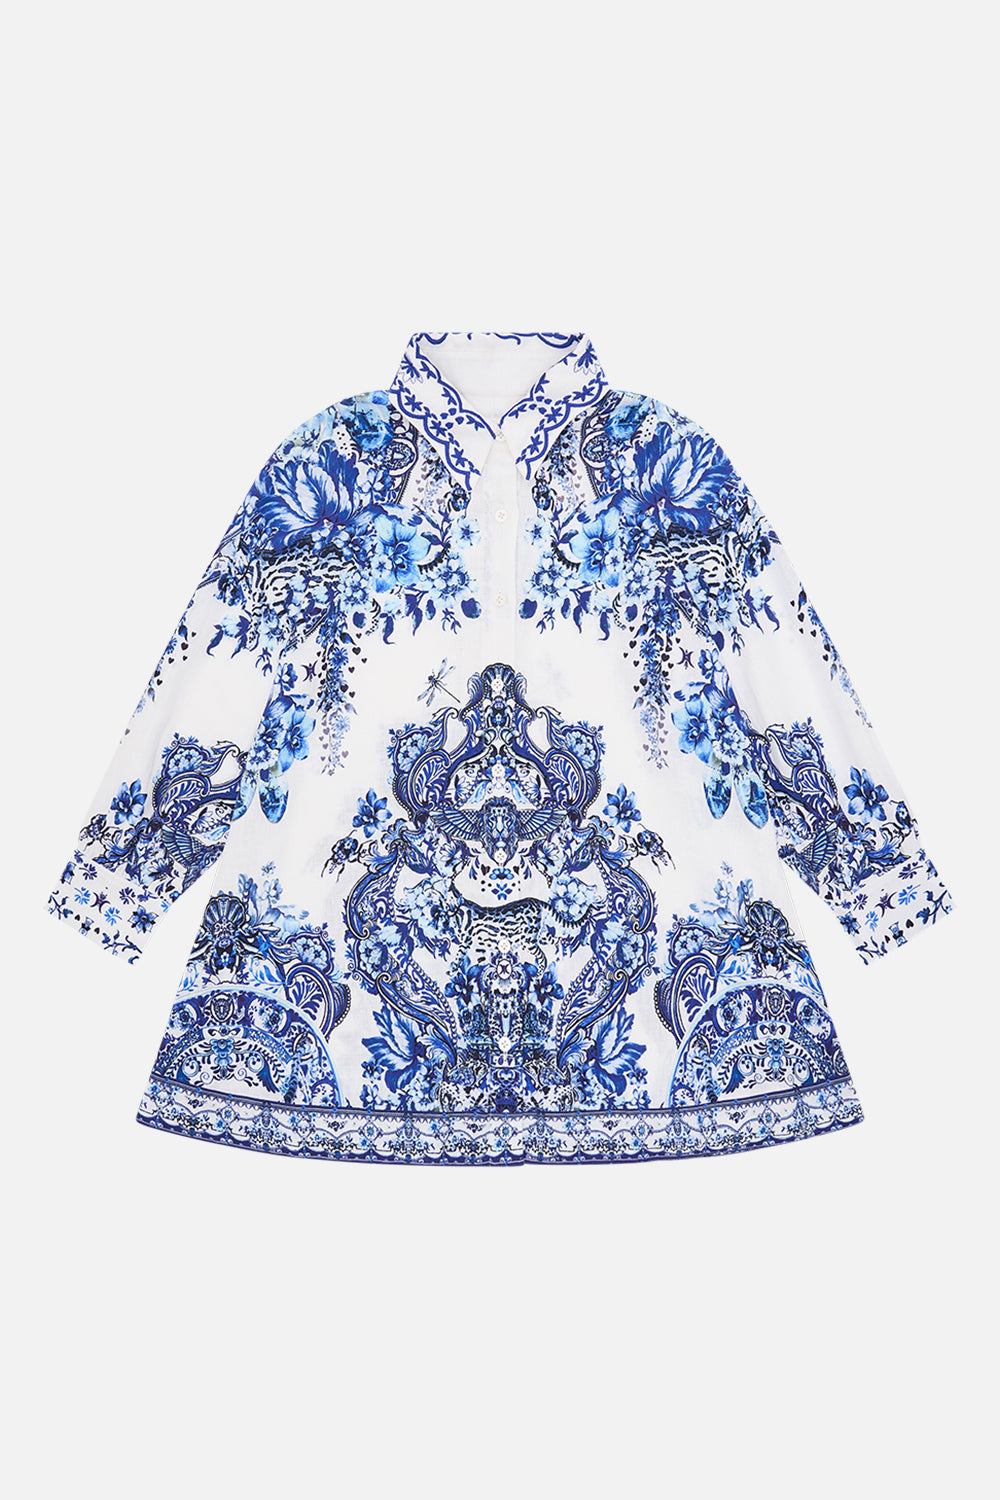 Front product view of Milla By CAMILLA kids mini sjirt dress in Glaze And Graze print